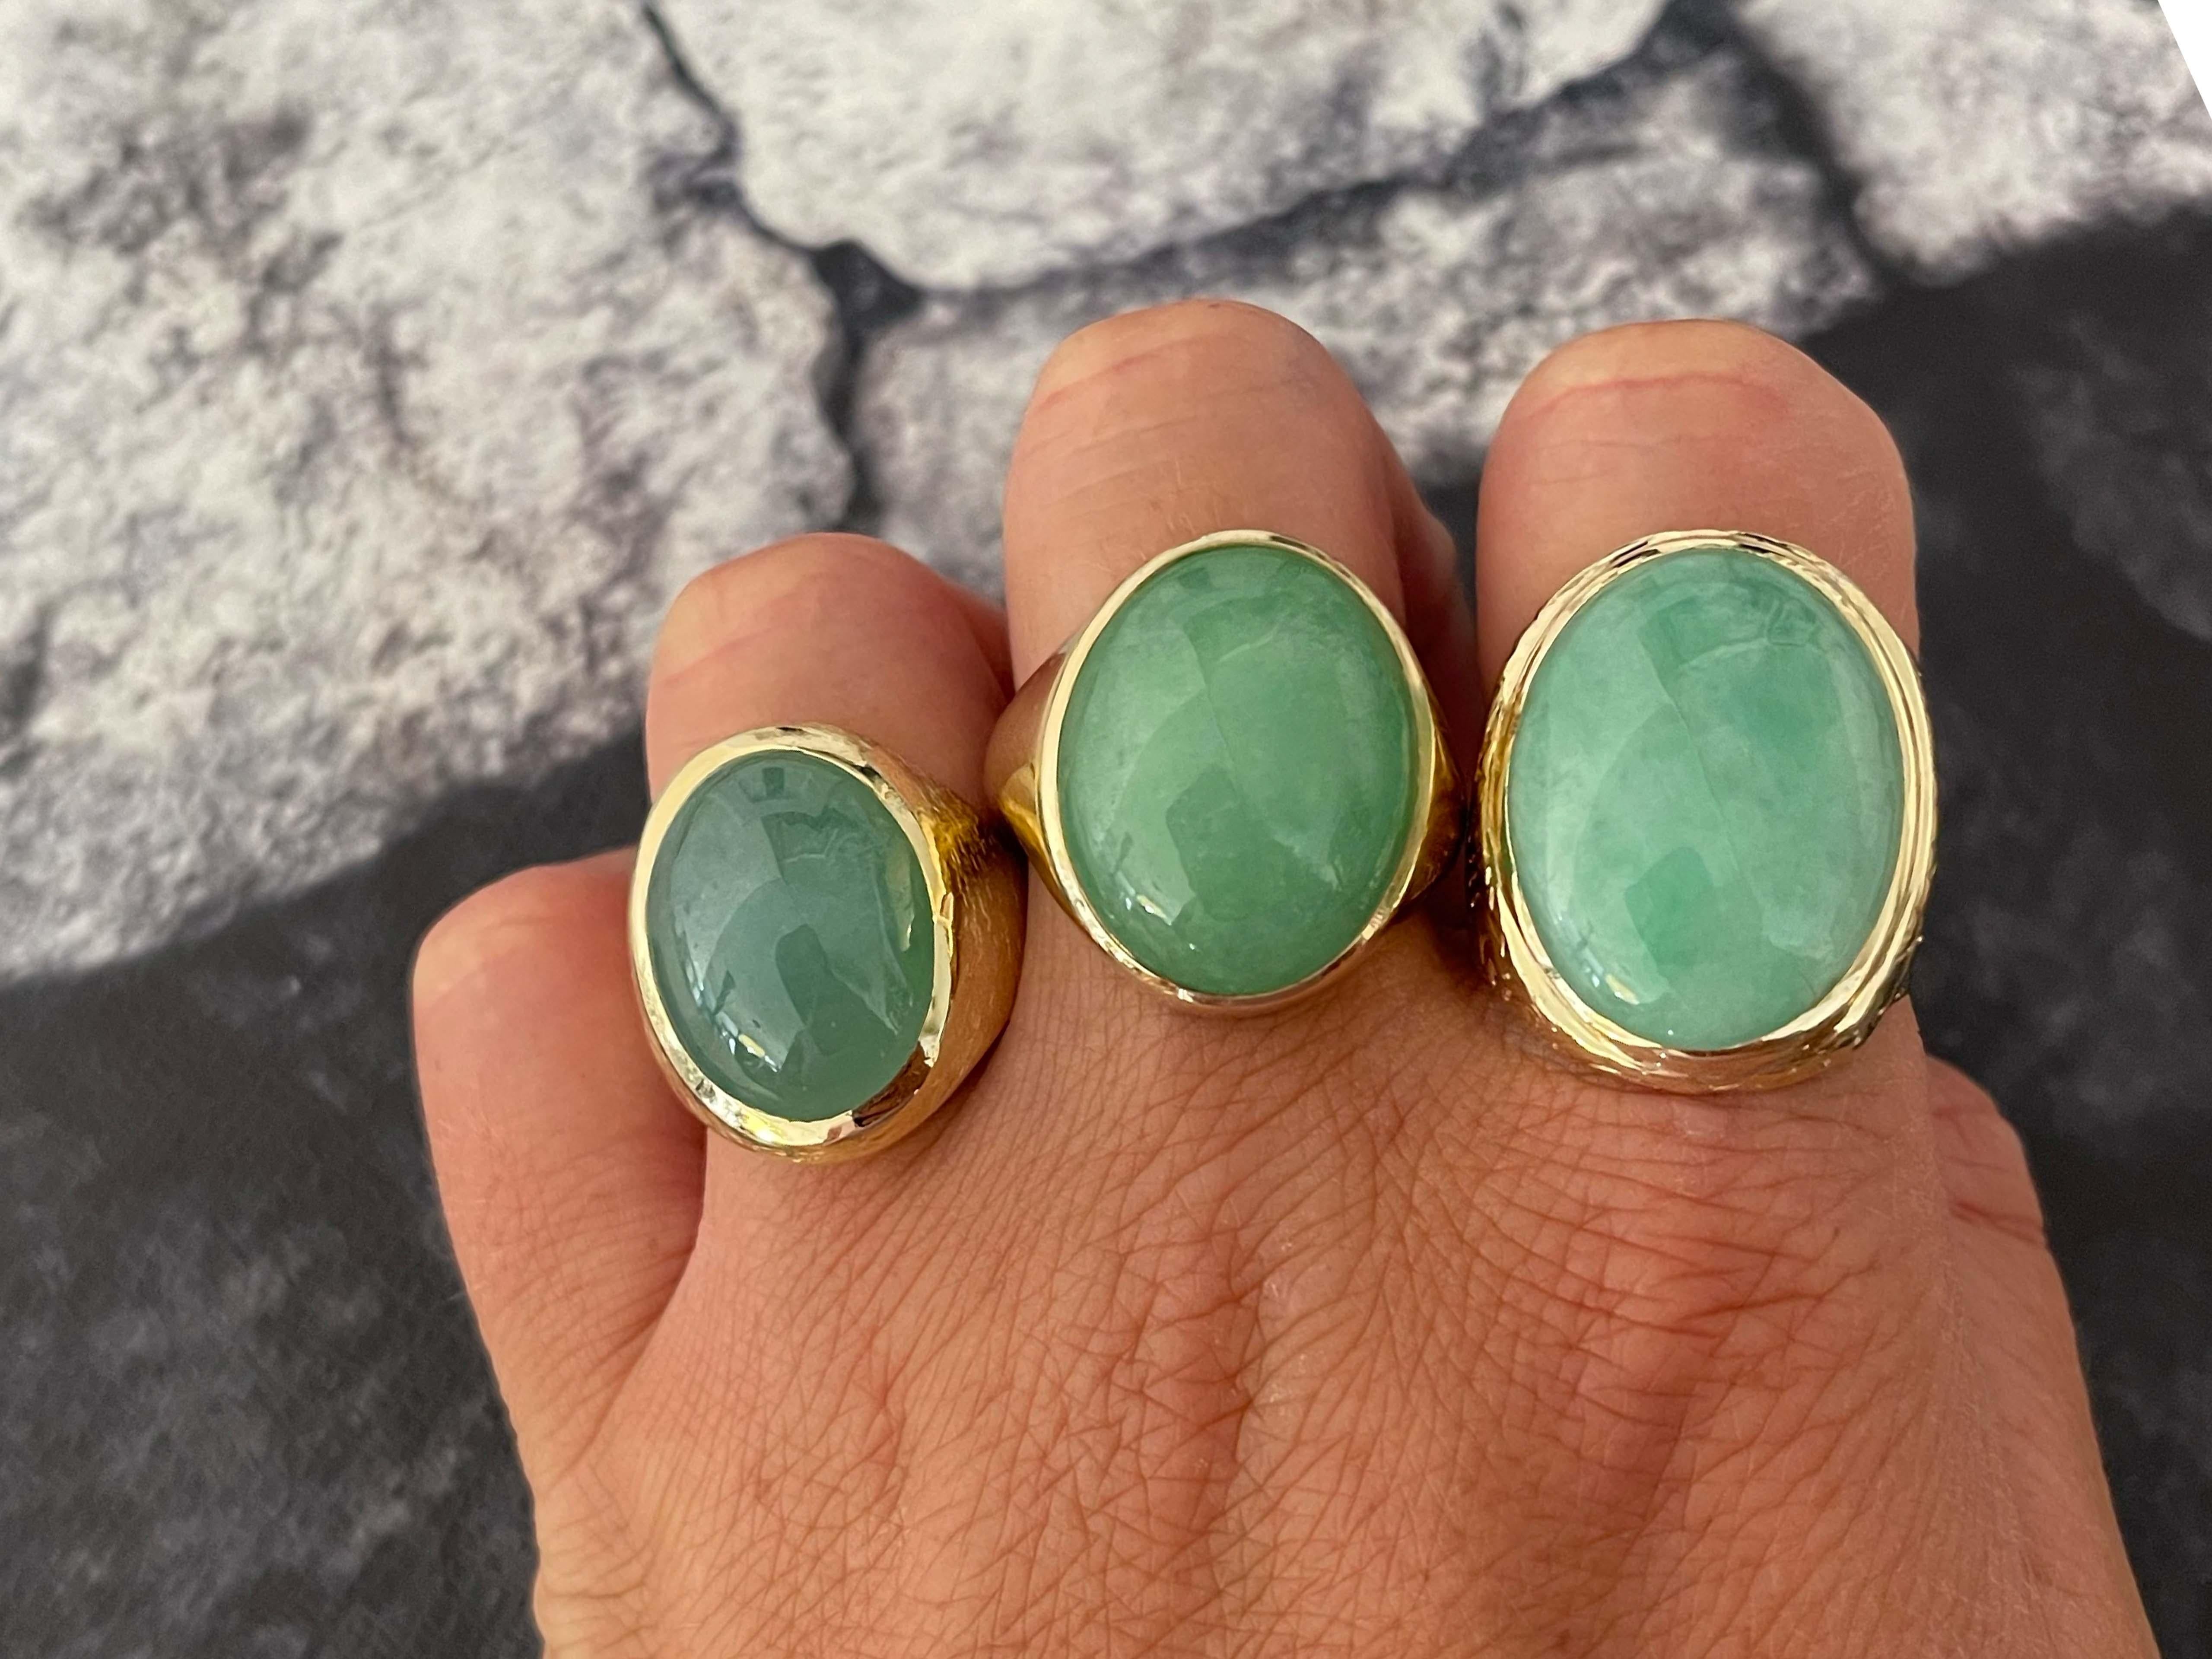 Item Specifications:

Metal: 14k Yellow Gold 

Style: Statement Ring

Ring Size: 11.75 (resizing available for a fee)

Total Weight: 13.8 Grams

Gemstone Specifications:

Center Gemstone: Jadeite Jade

Shape: Oval

Color: Green

Cut: Cabochon

Jade